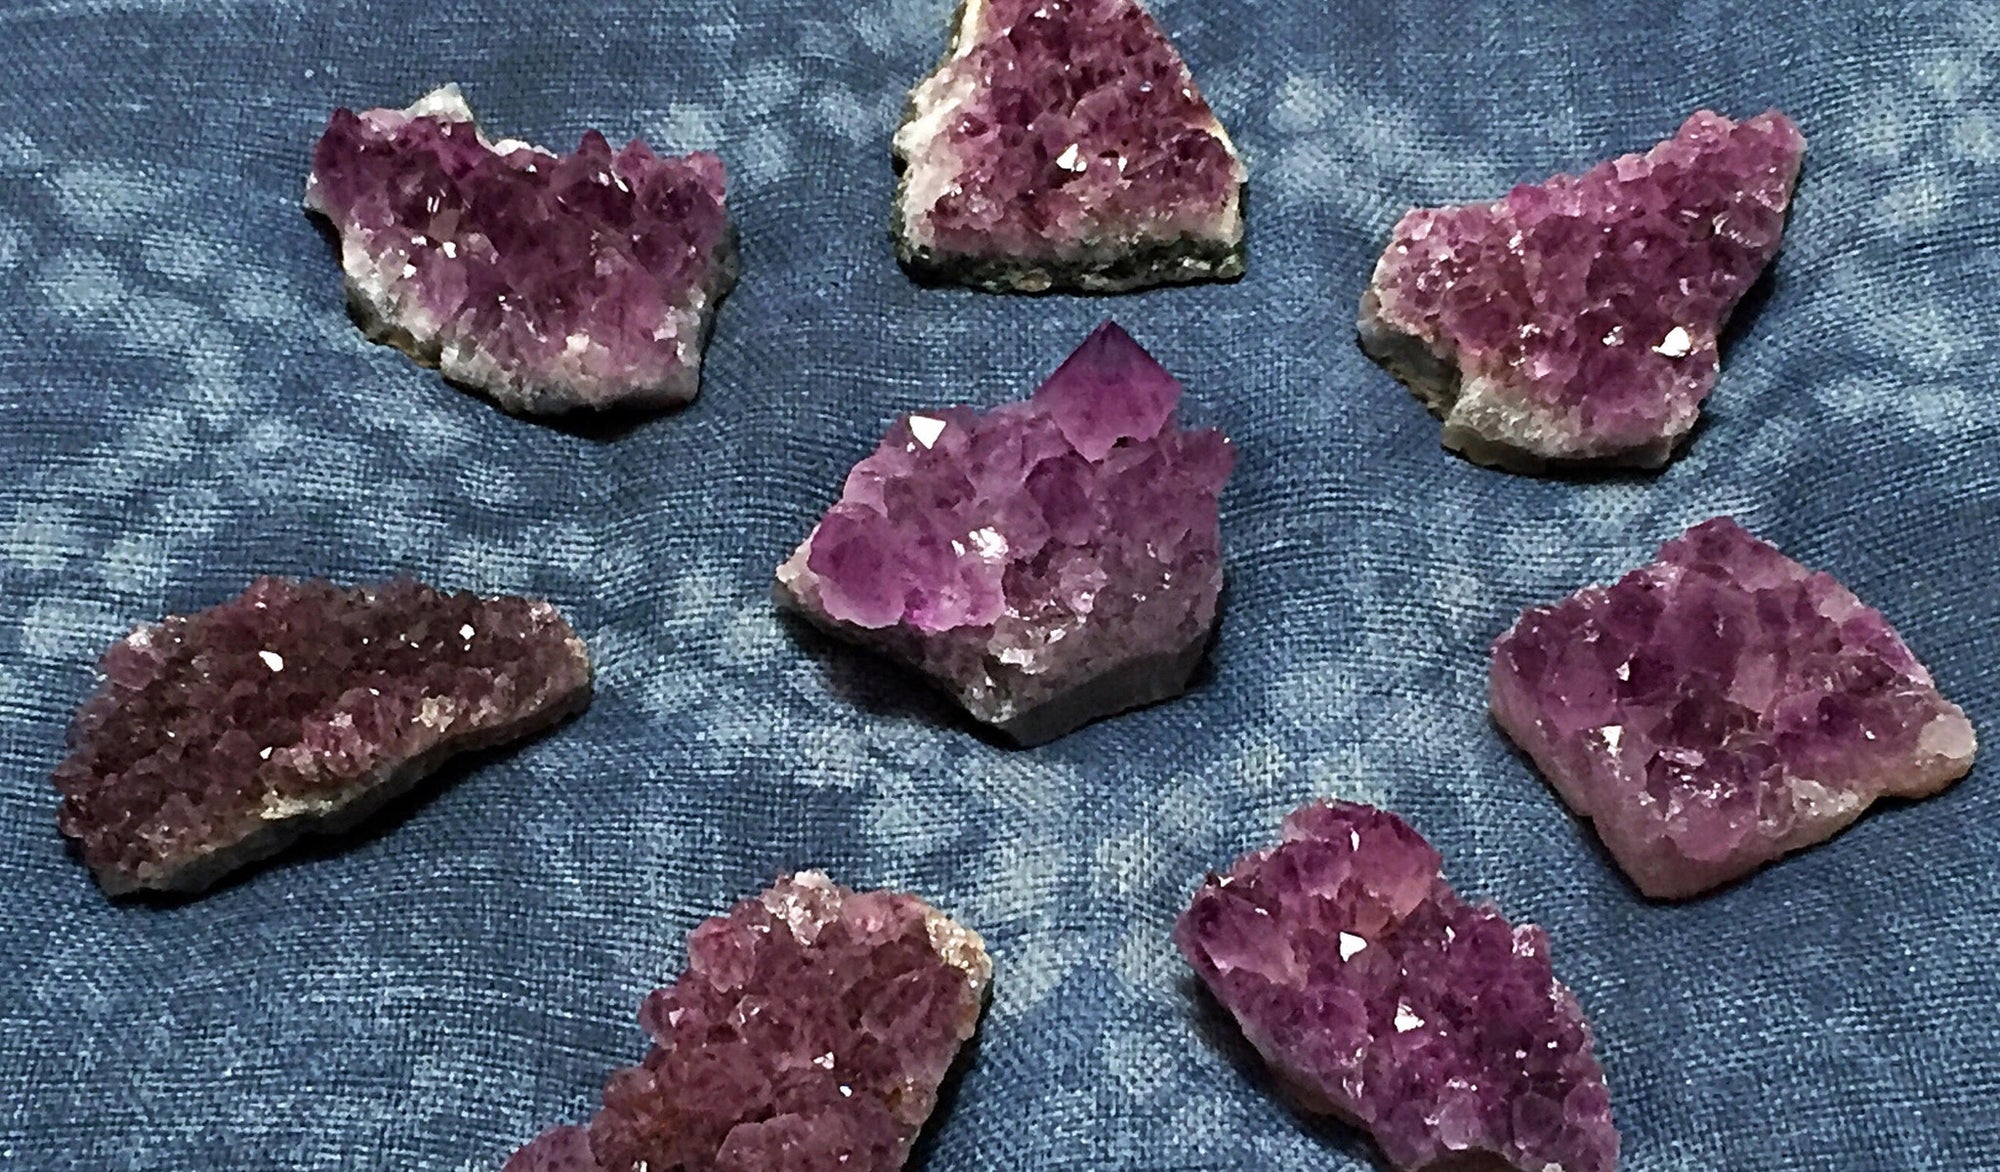 Learn more about Amethyst